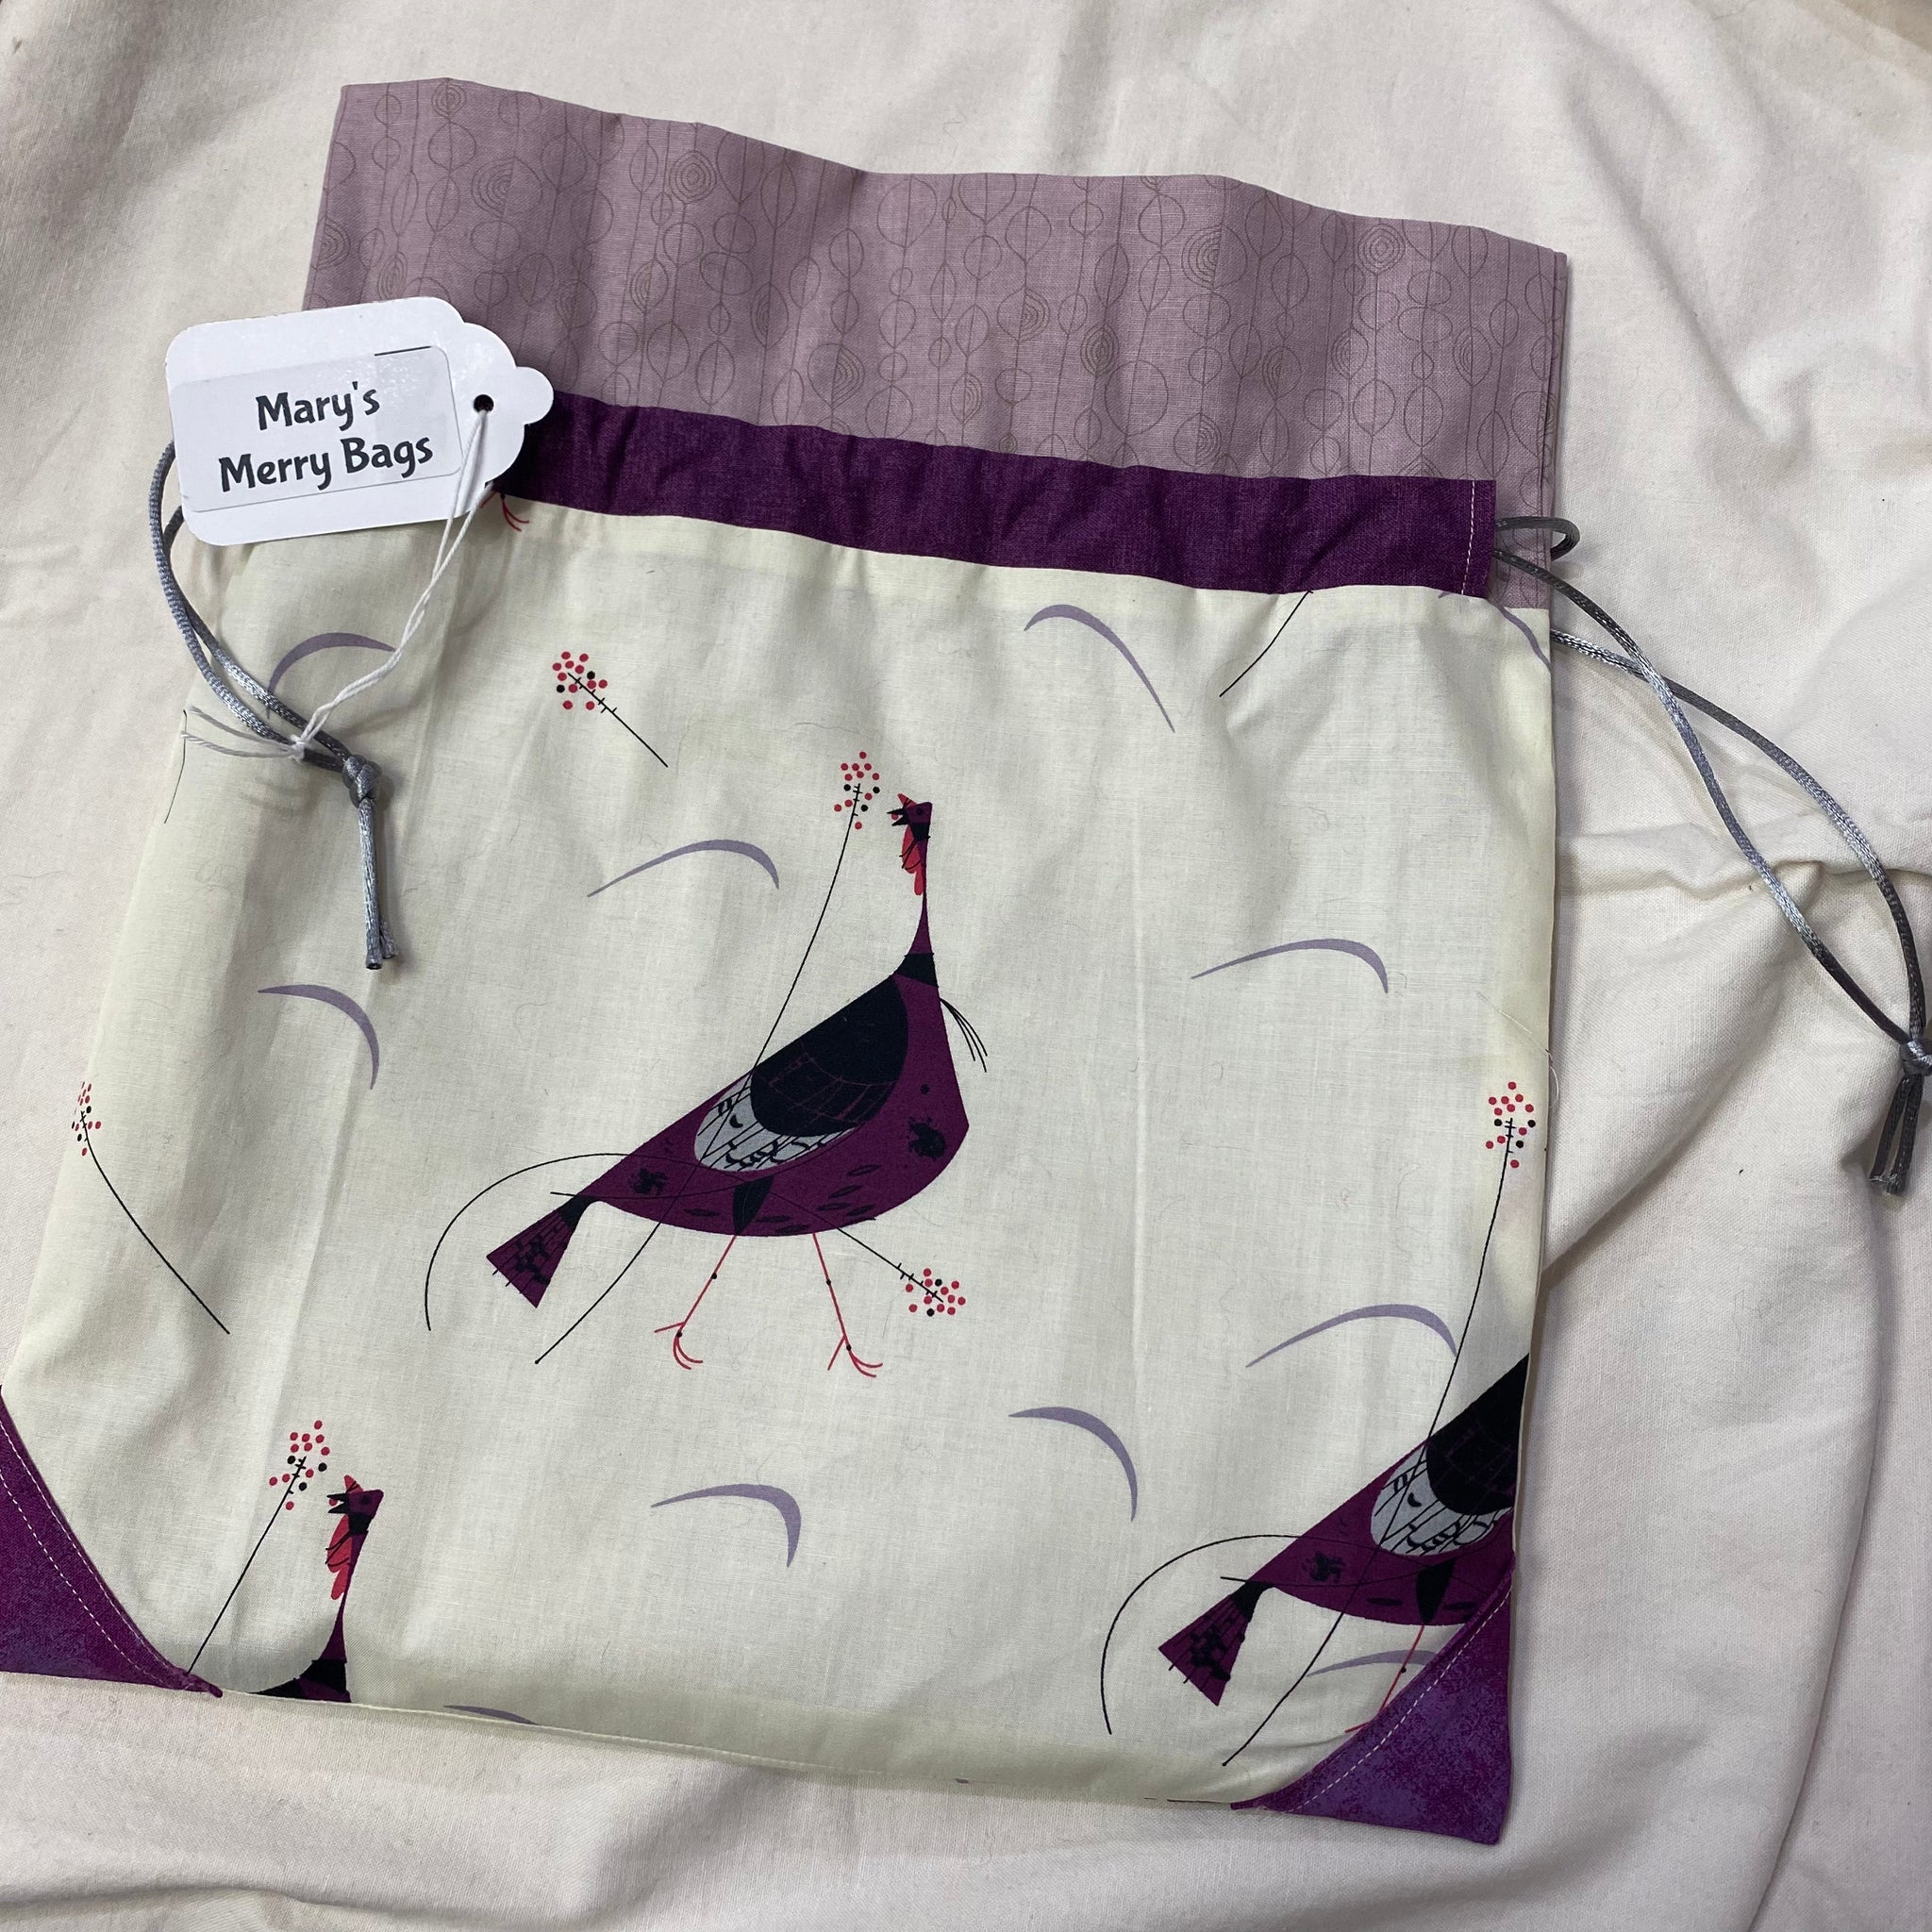 Mary's Merry Bag - Large in Charley Harper Fabric